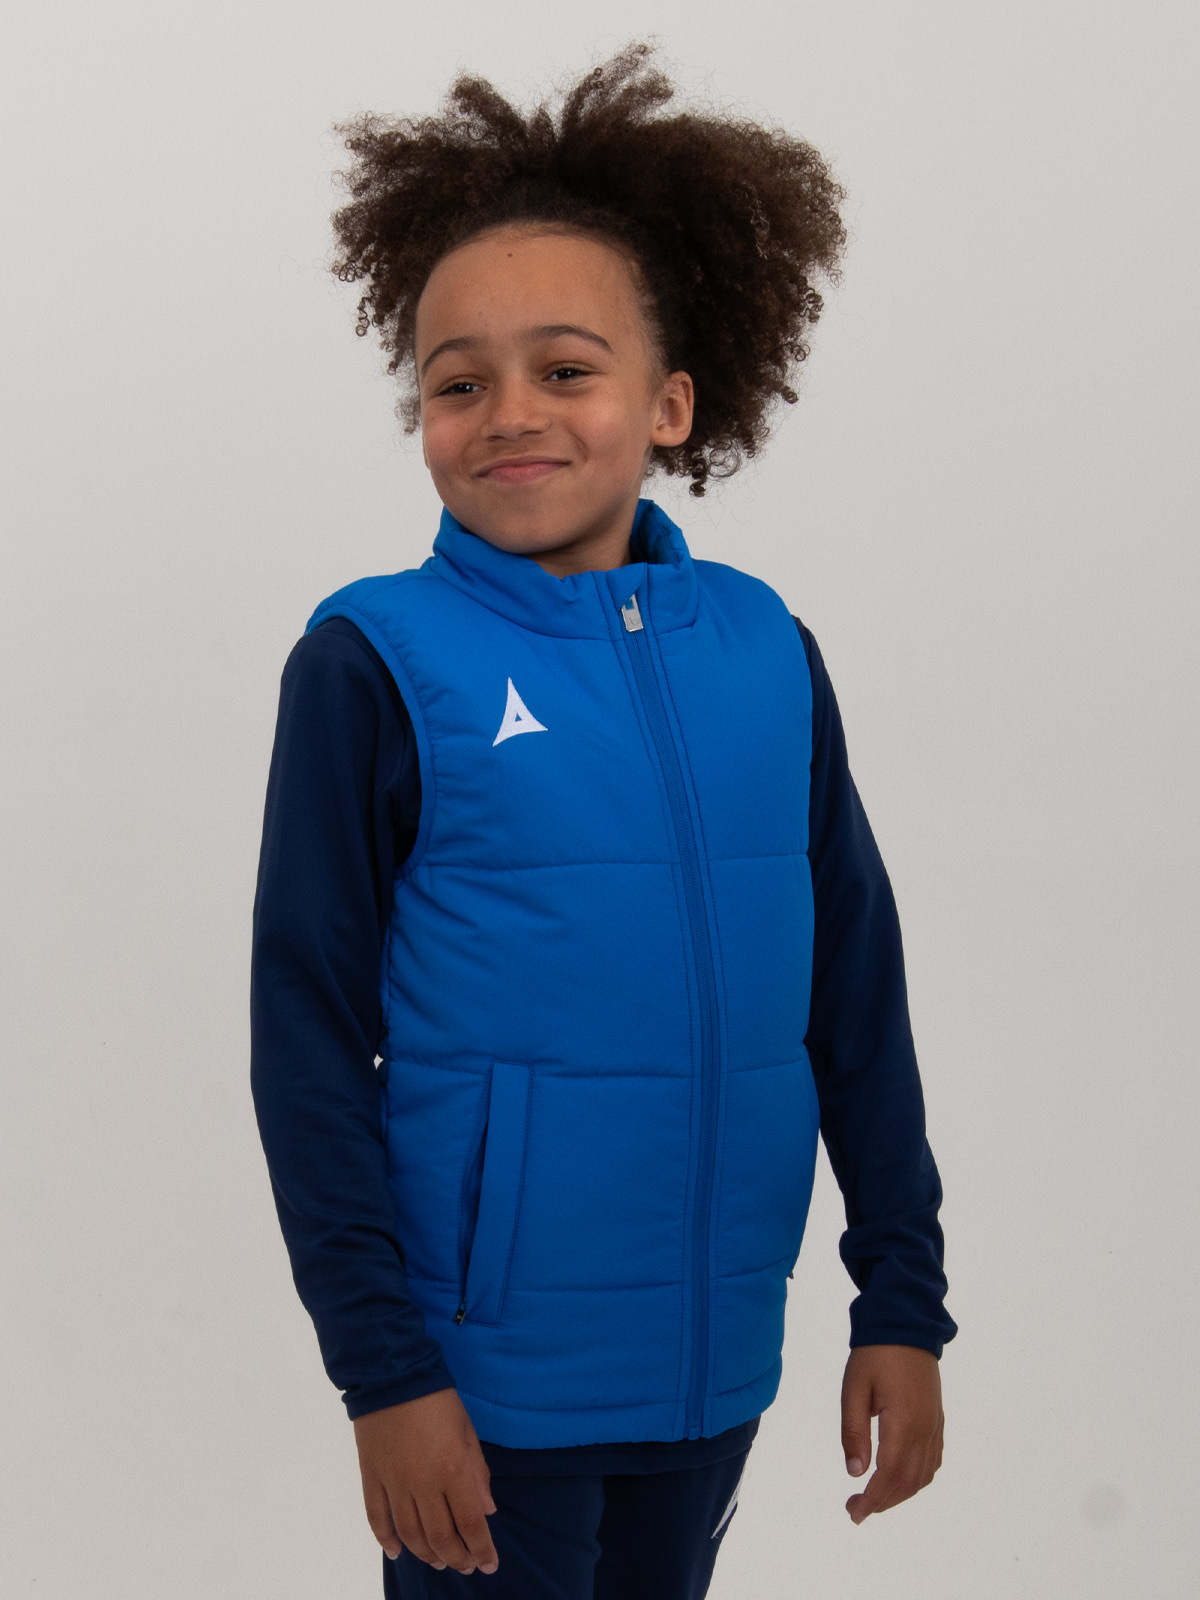 a young boy is wearing a royal blue padded gilet